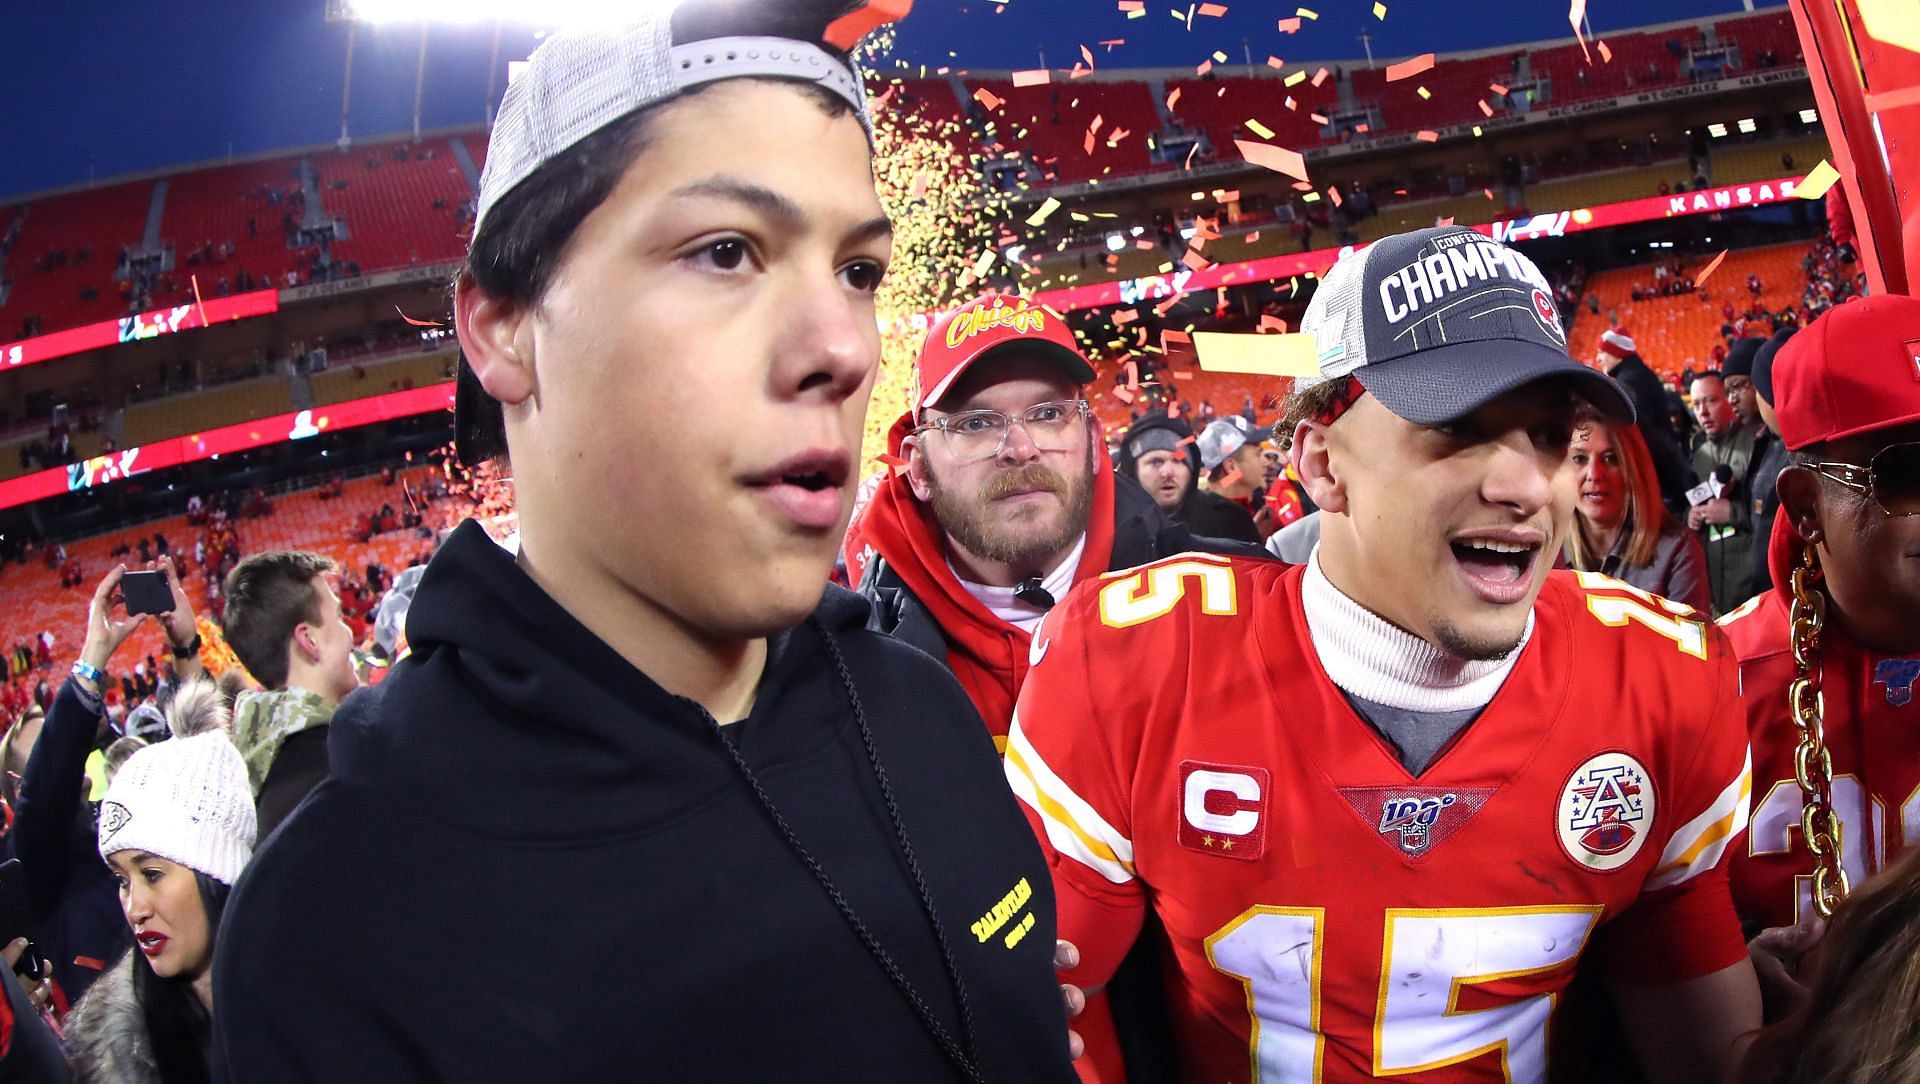 Jackson Mahomes: Why Fans Love to Hate Him + His TikTok Fame